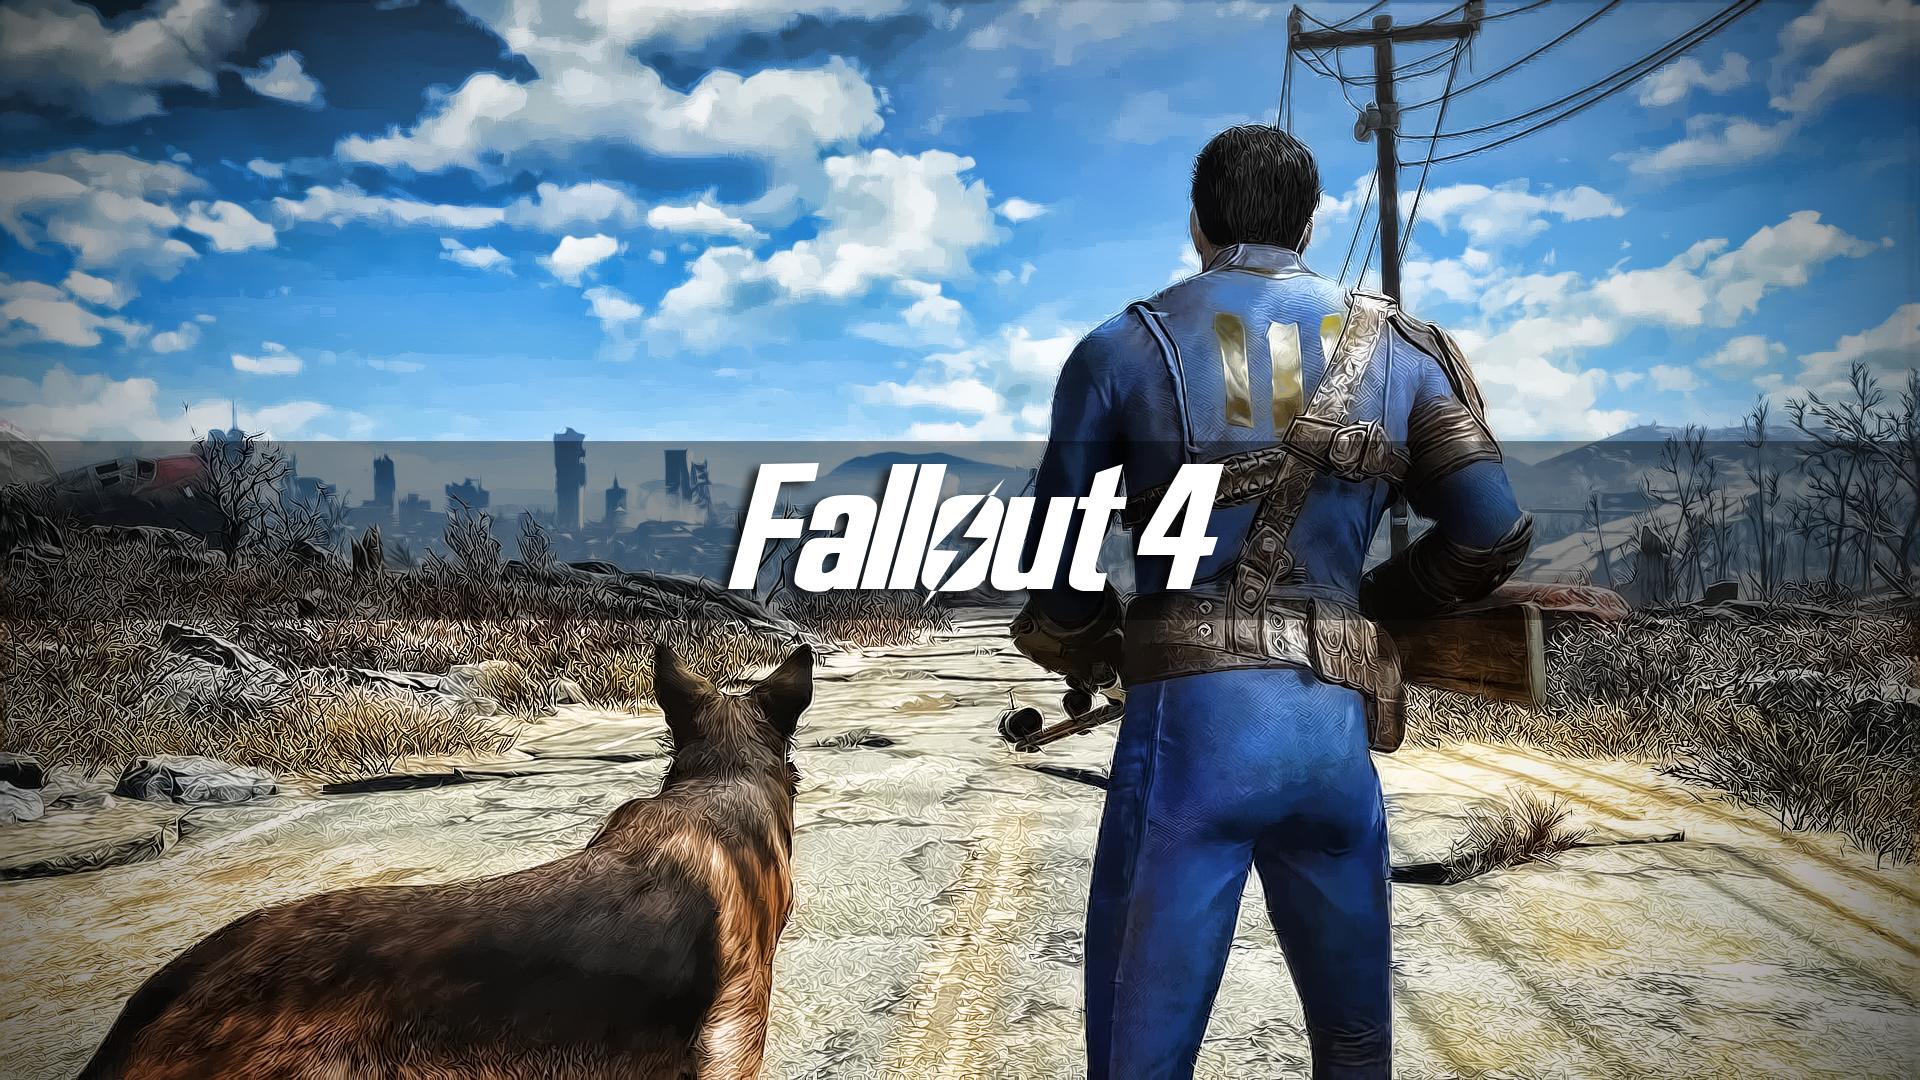 Fallout Pc Systems Requirements Revealed Puter Hardware Res